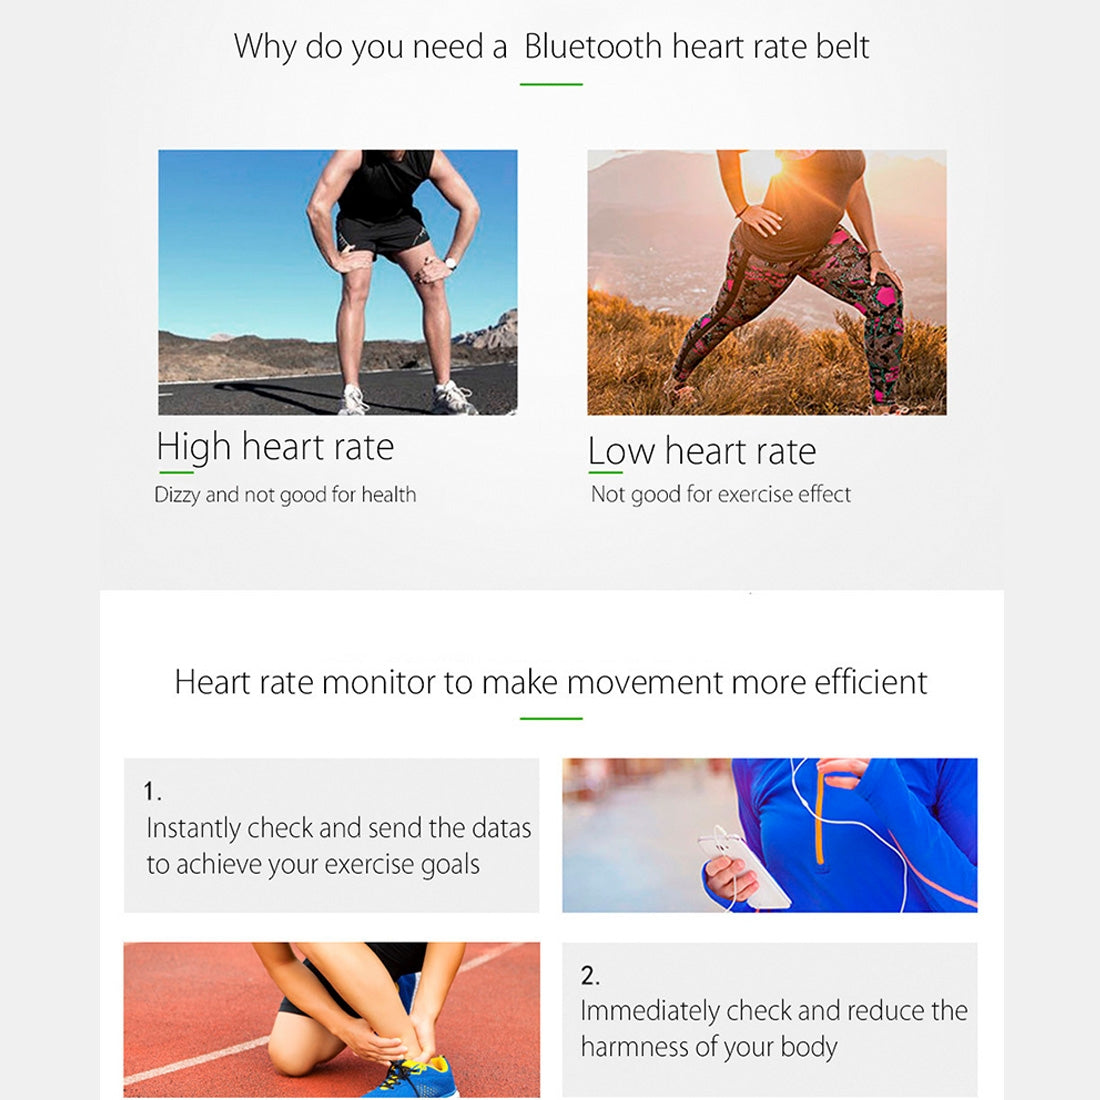 CooSpo H6 Bimodule Heartbeat Rate Chest Belt, Bluetooth and ANT+, Compatible with both Android and iOS System